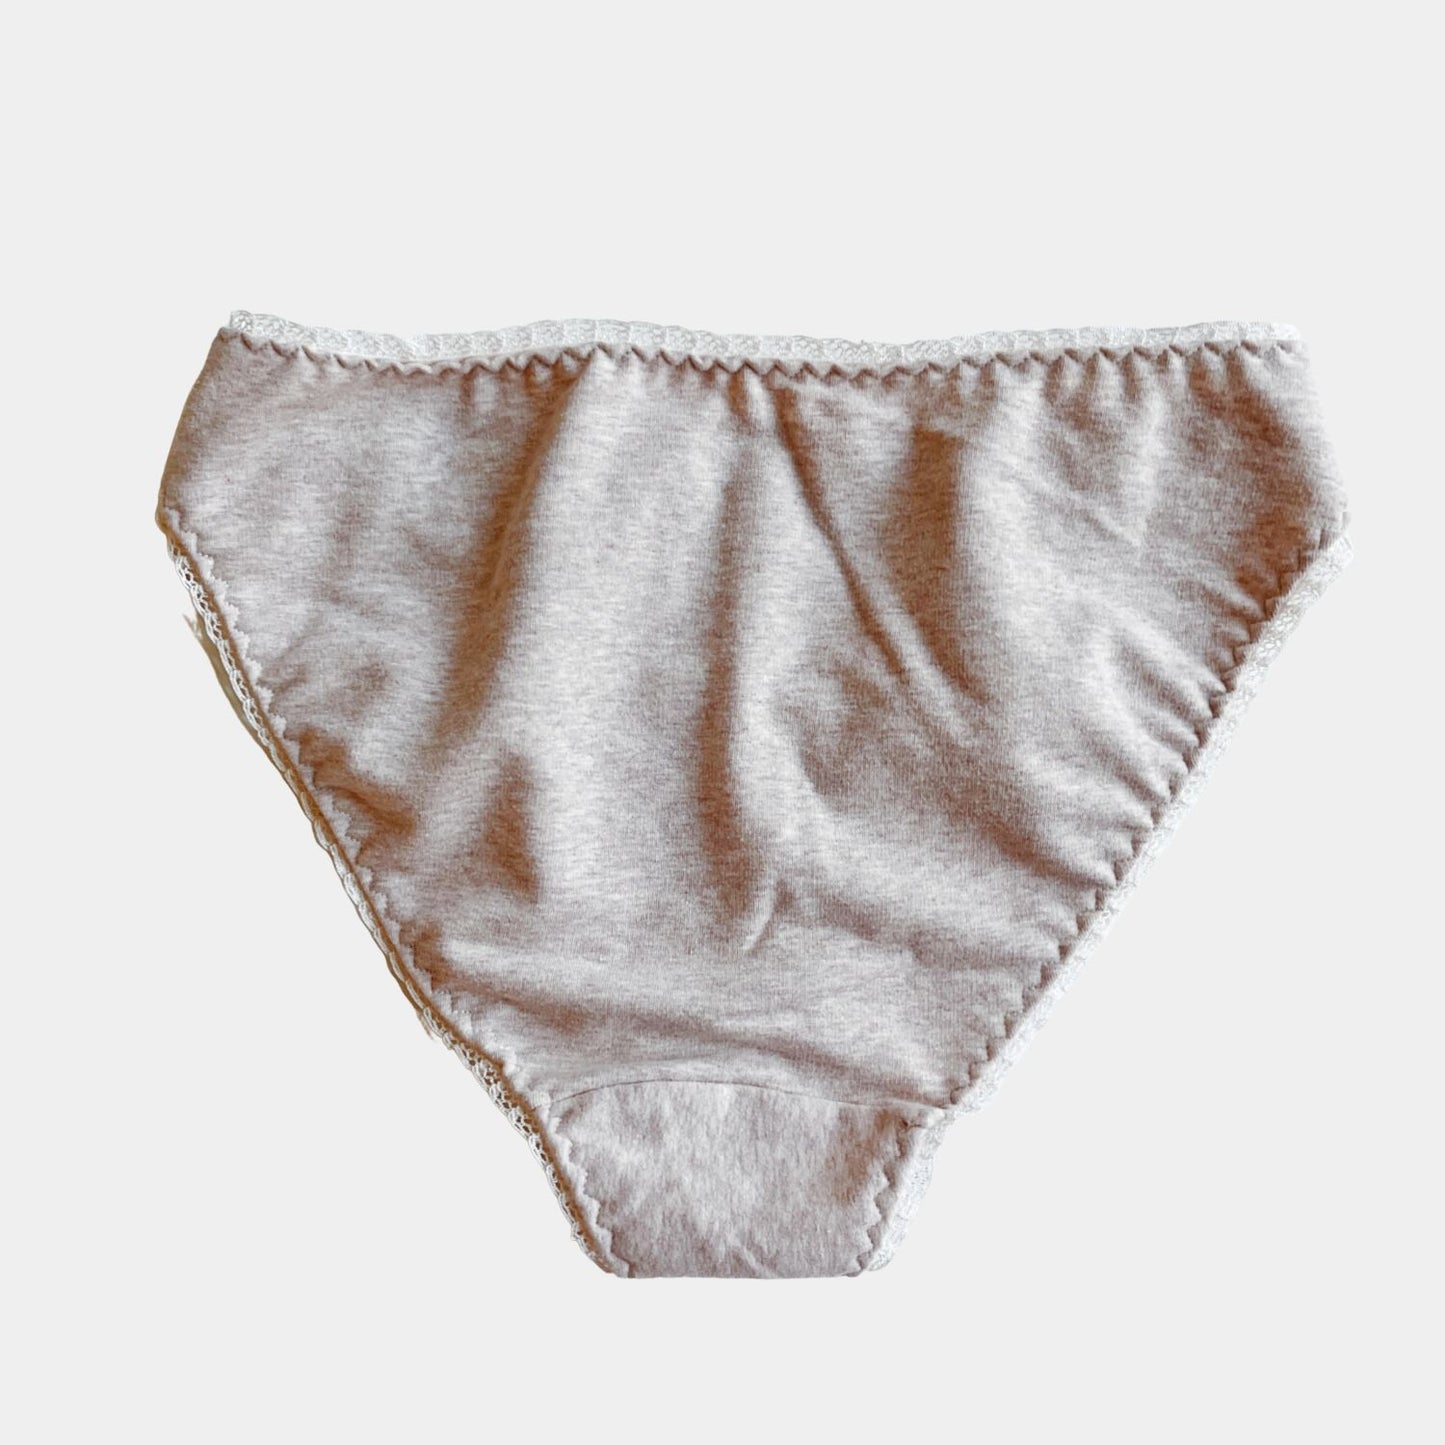 organic cotton lace panties | Made in Canada 